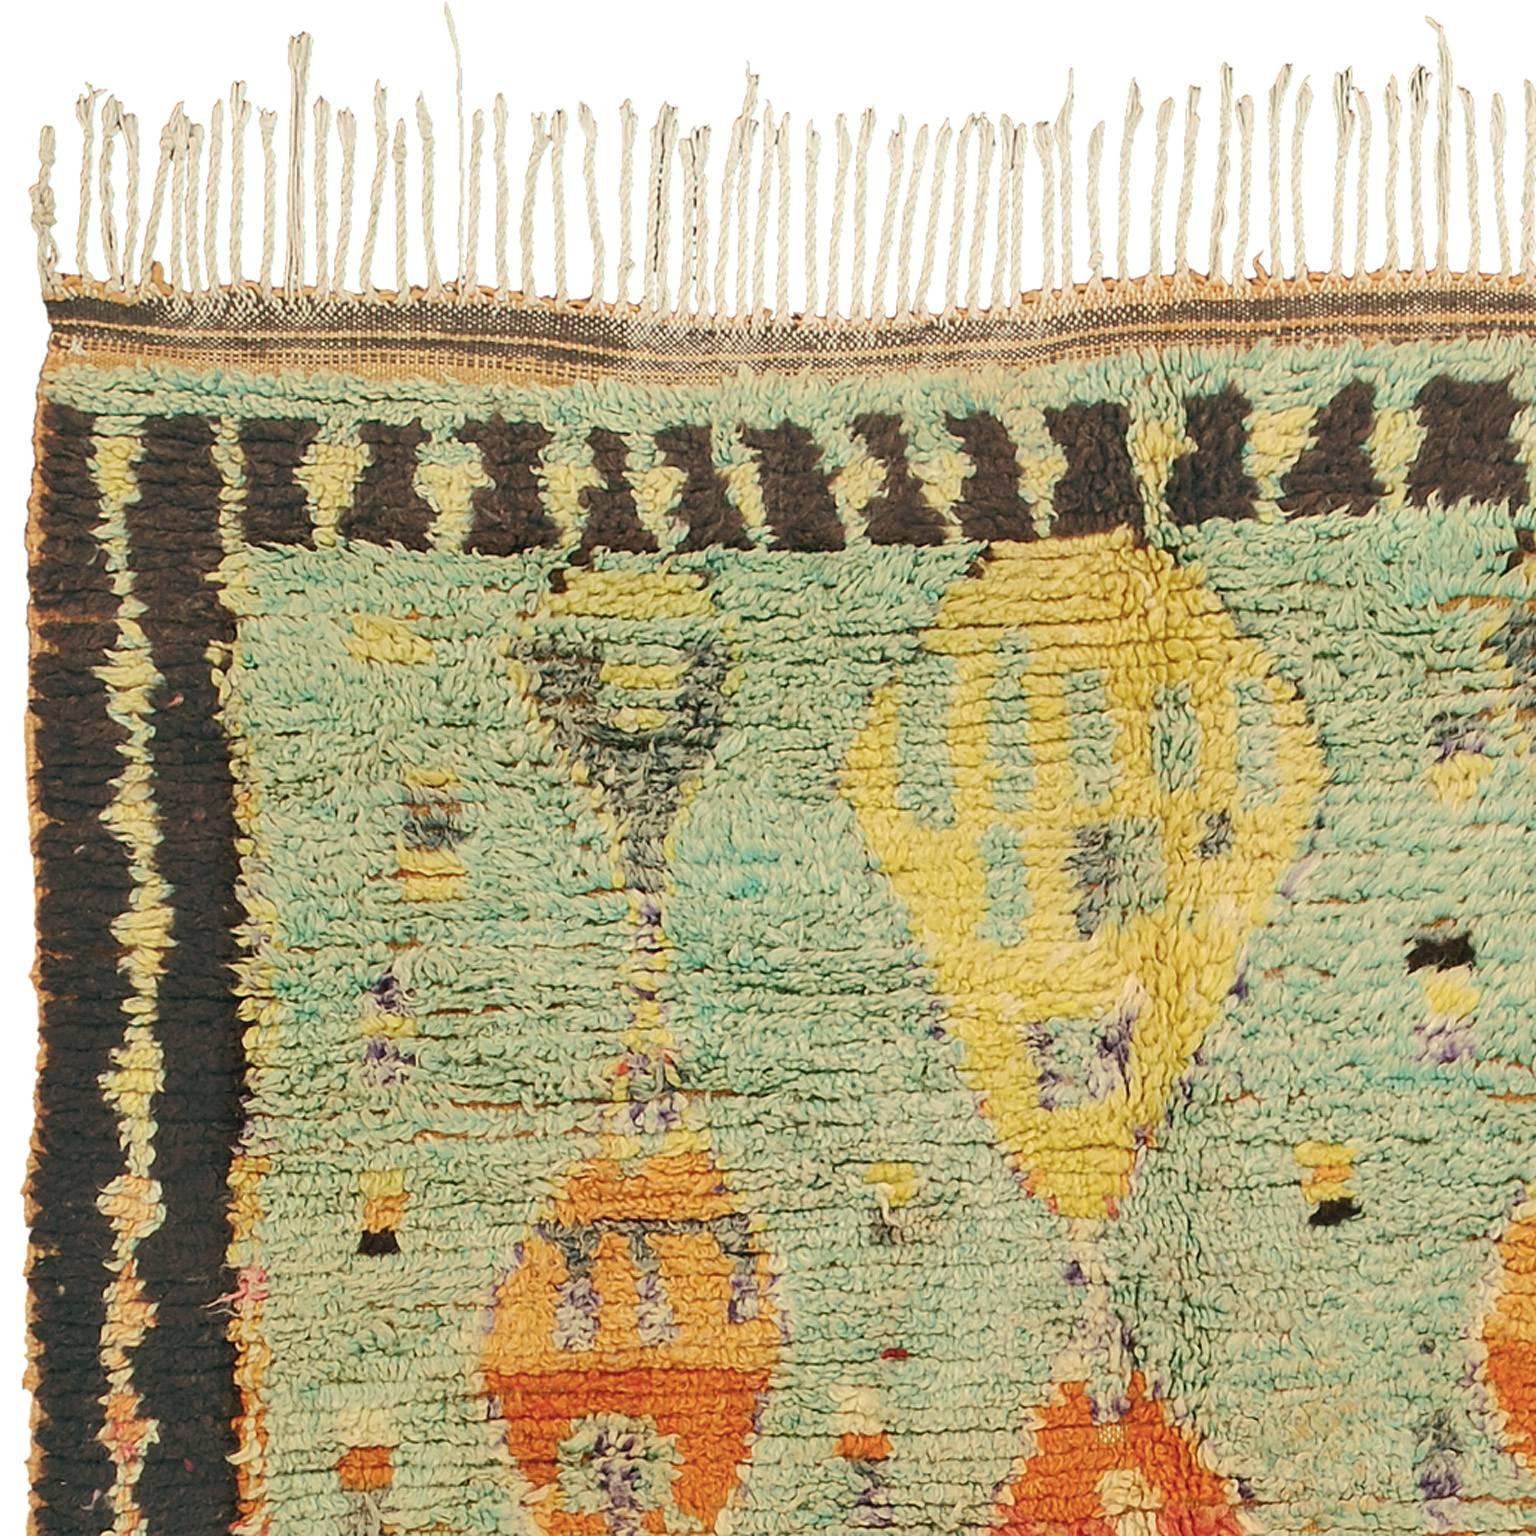 Hand-Woven Mid-20th Century Moroccan 'Boujad' Carpet For Sale